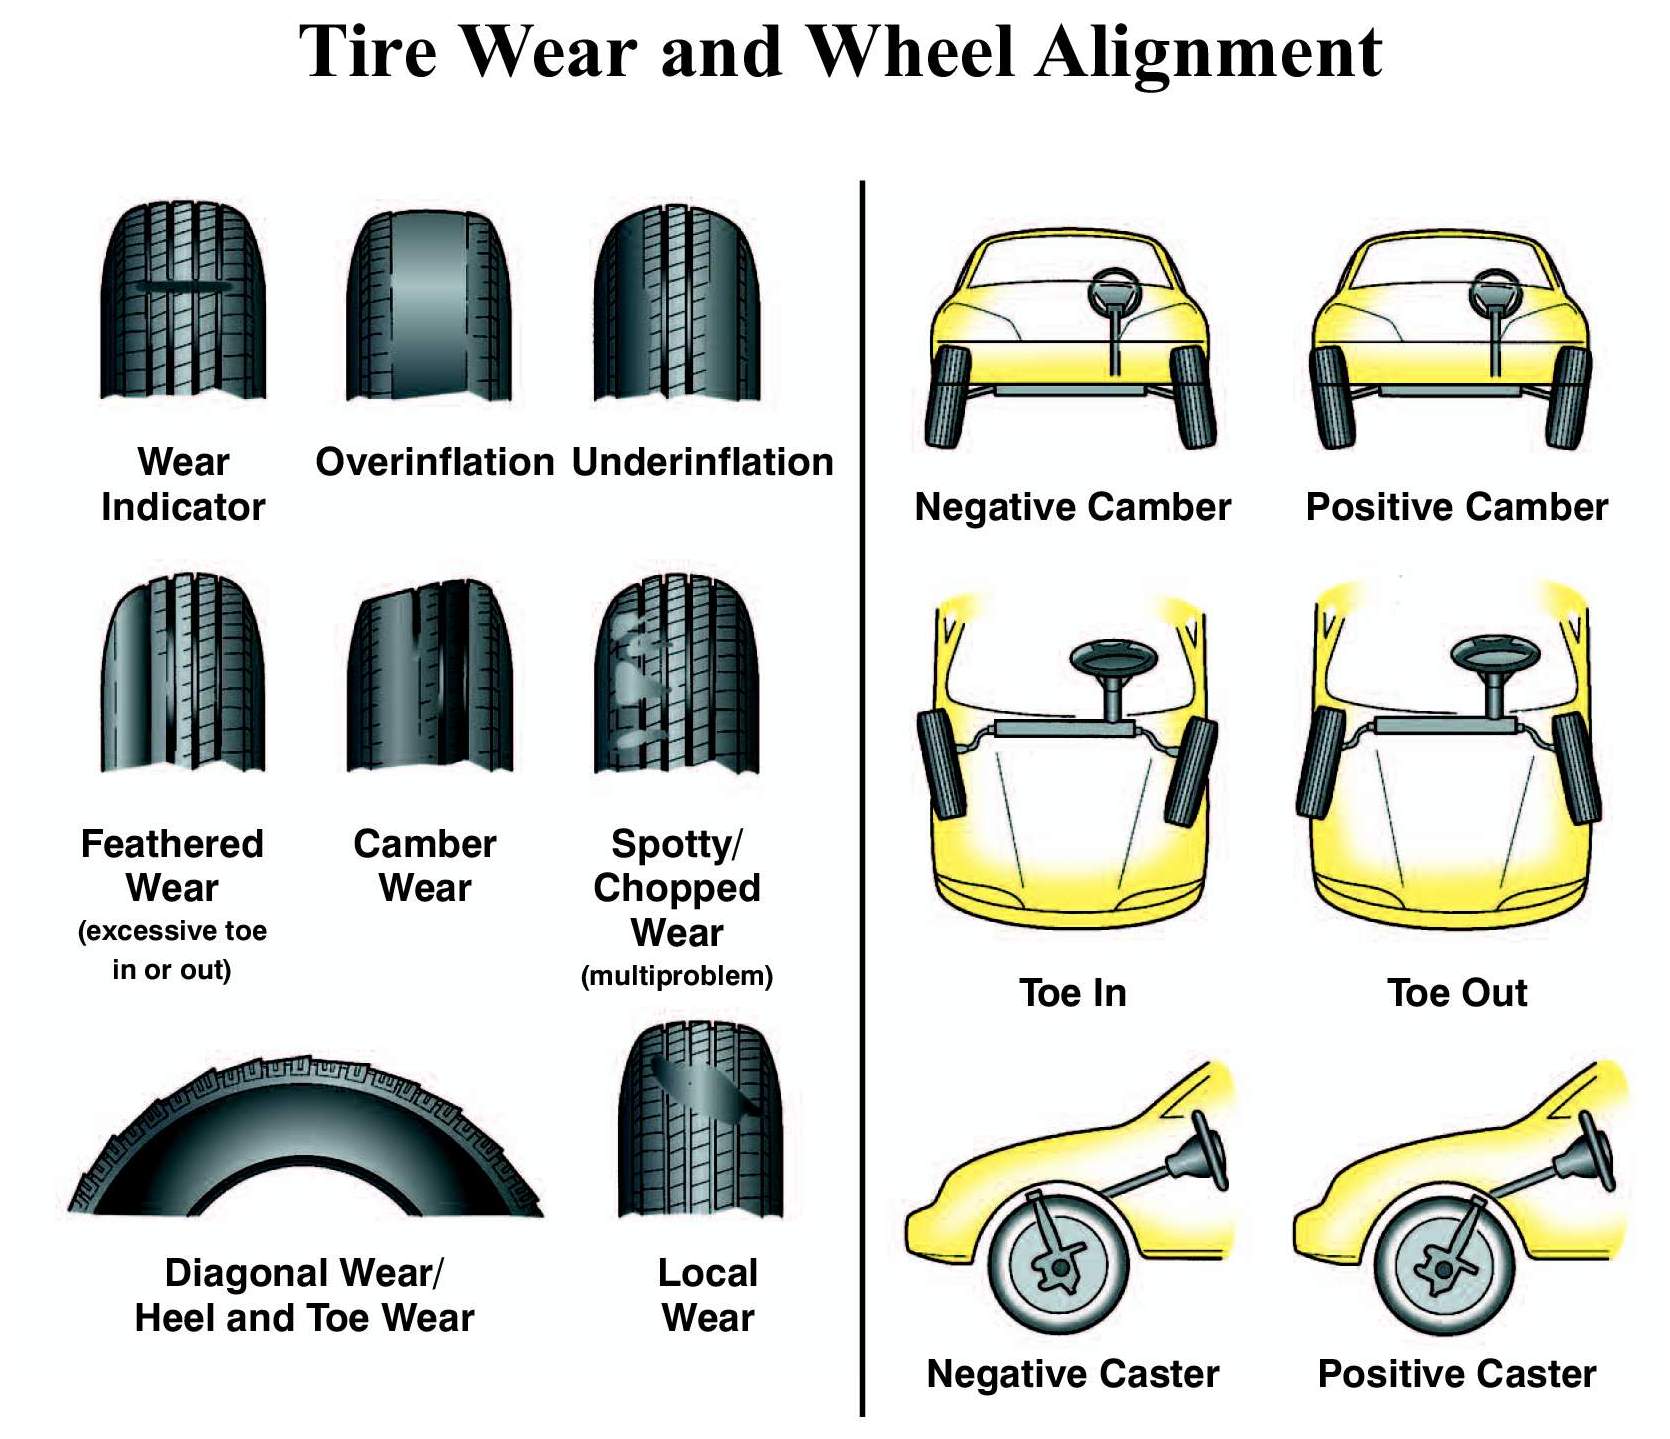 Tire Wear and Wheel Alignment